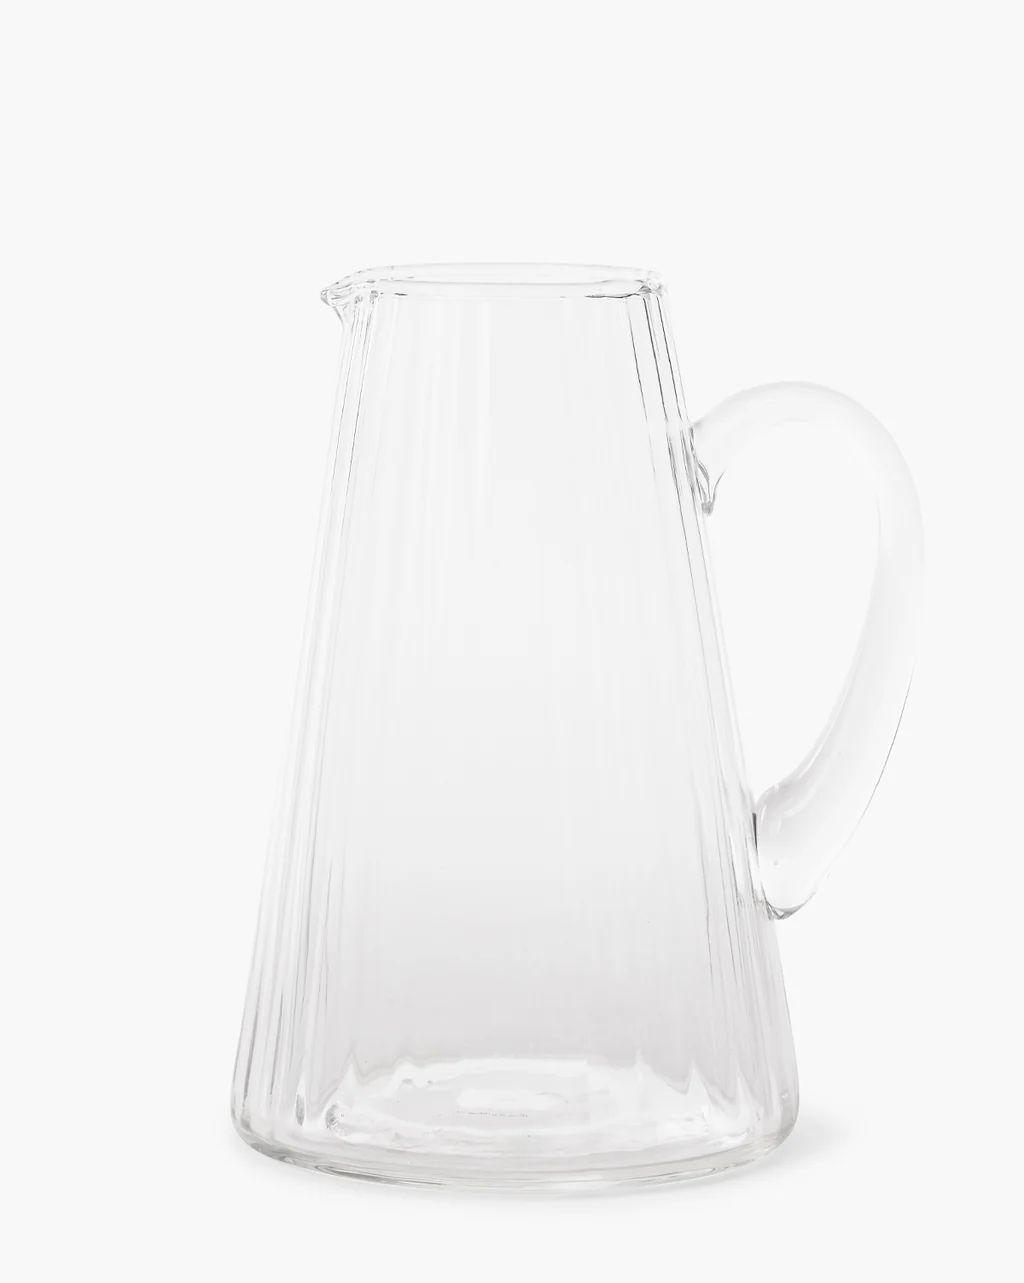 Adonis Ribbed Glass Pitcher | McGee & Co.